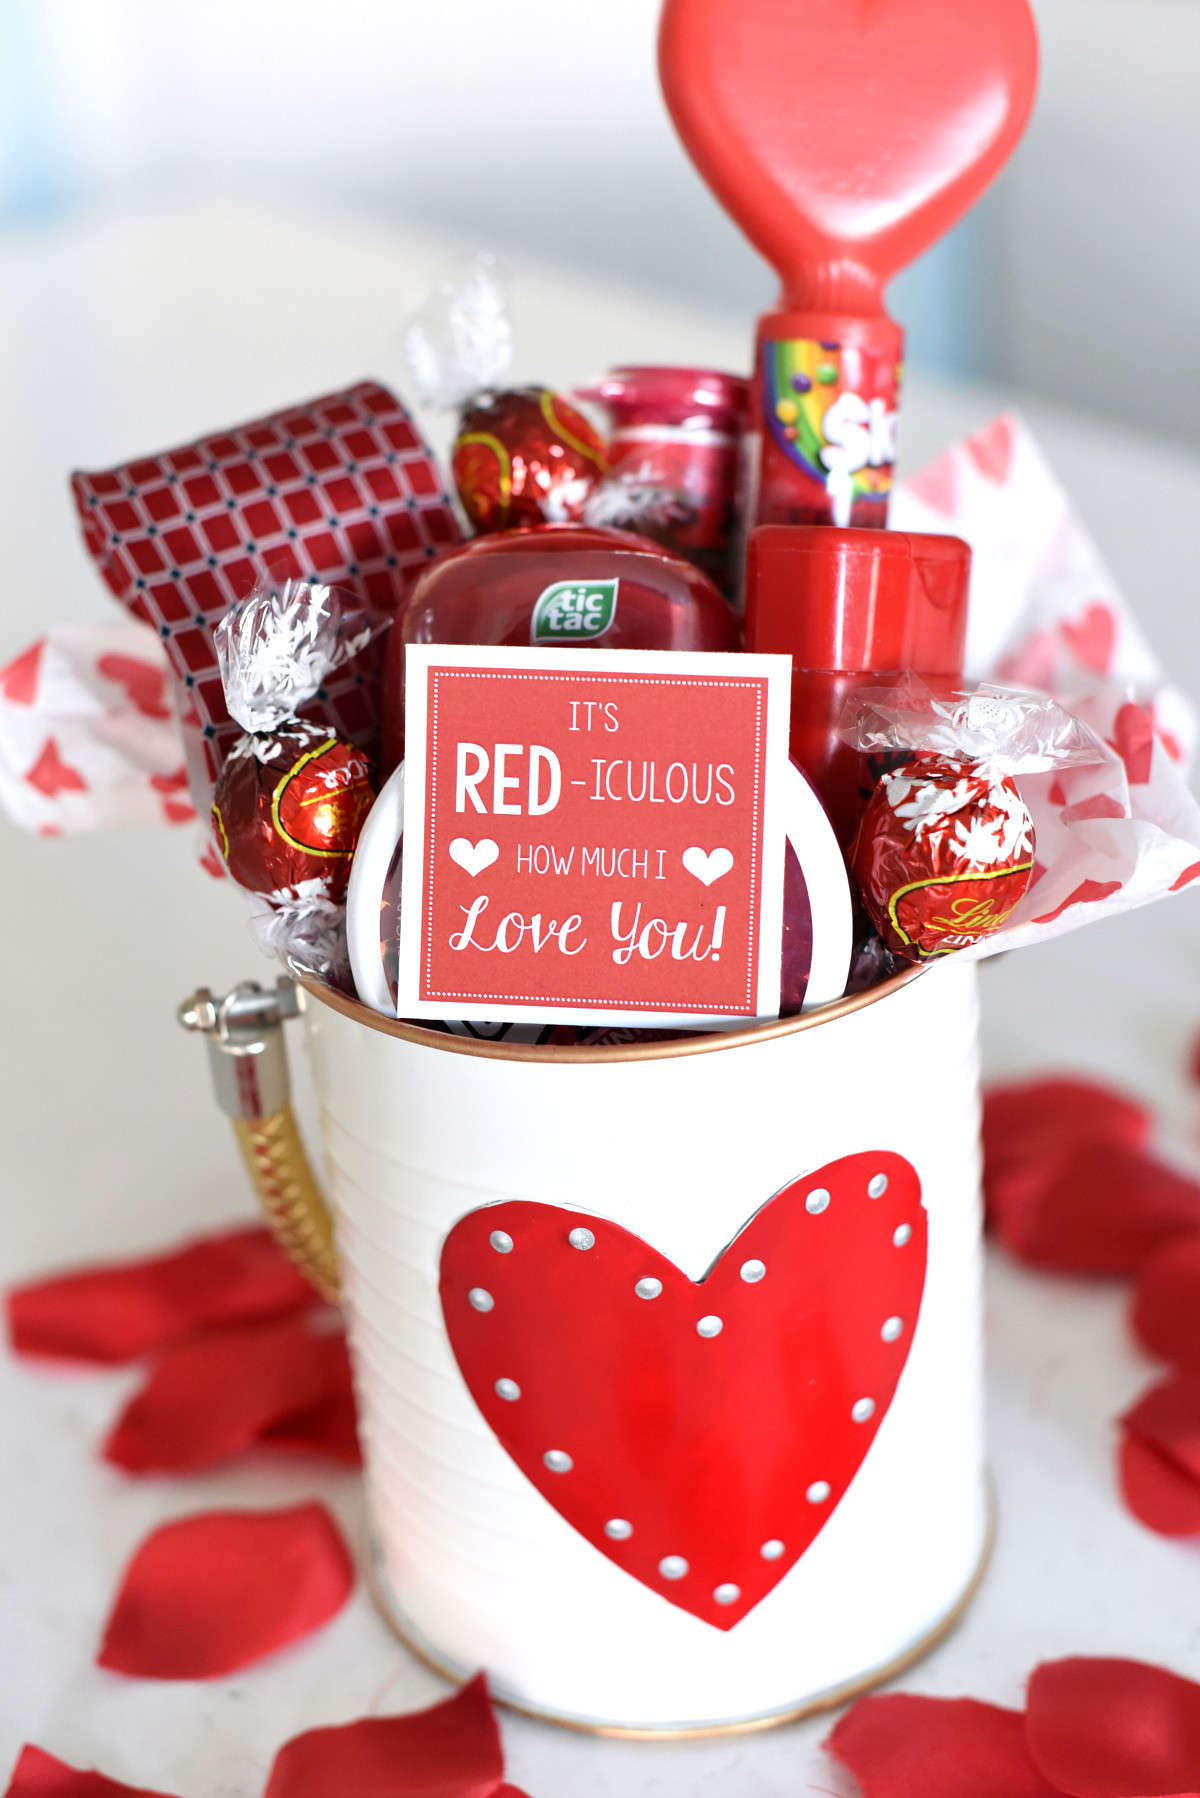 Valentines Day Gift Ideas For My Husband
 Cute Valentine s Day Gift Idea RED iculous Basket